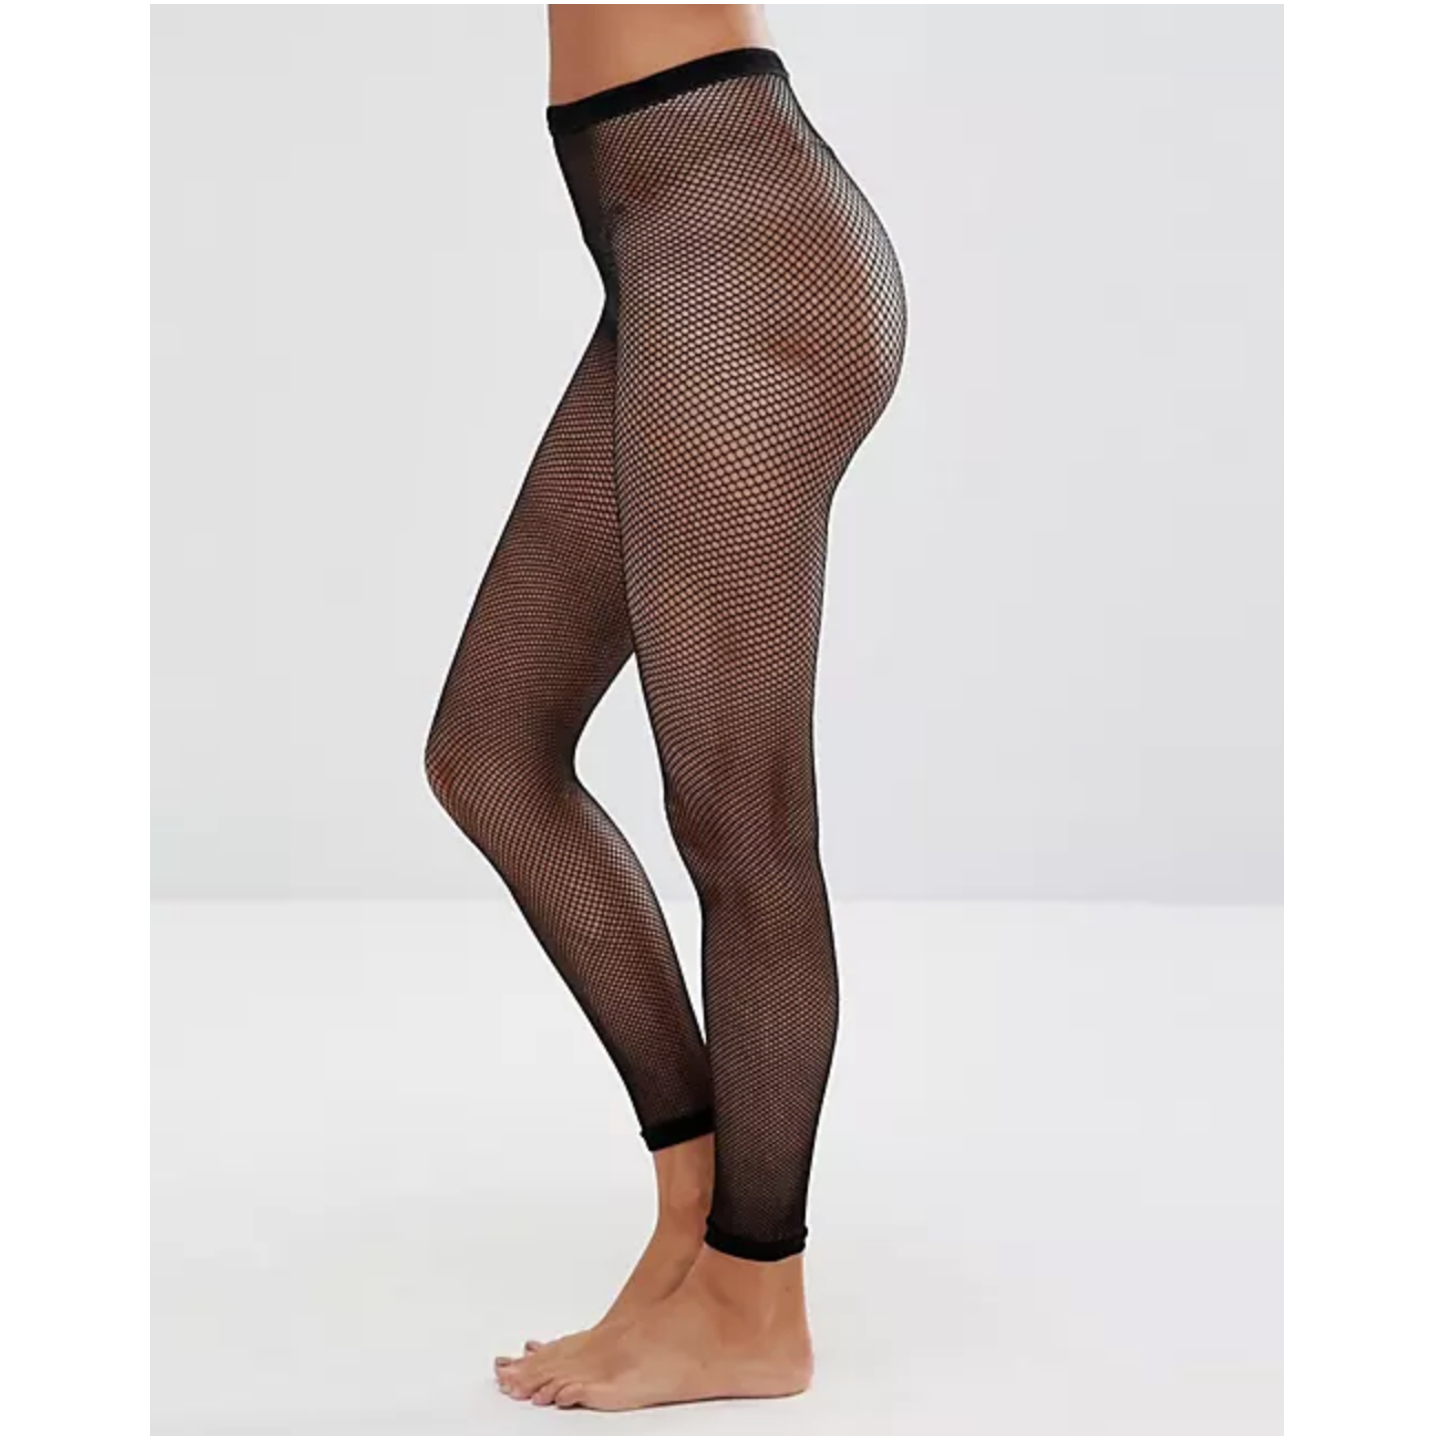 PATTERNED FISHNET FLORAL LACE NET FULL LENGTH FOOTLESS TIGHTS Festival  Christmas | eBay